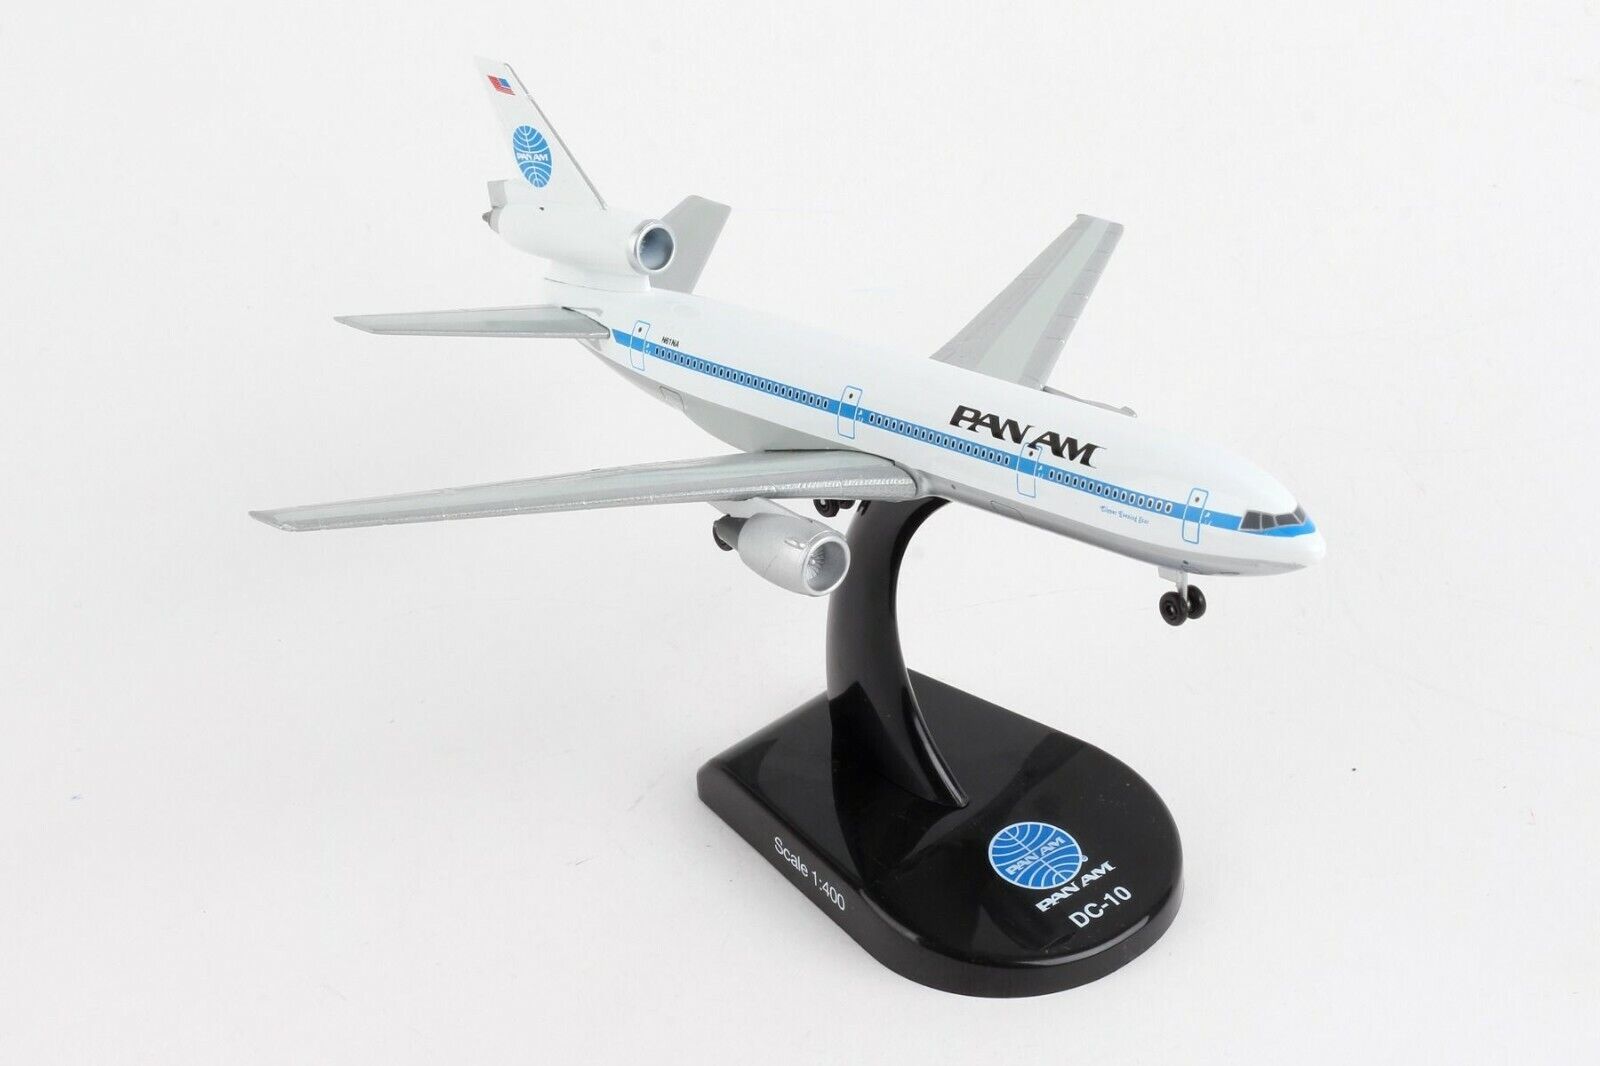 POSTAGE STAMP (PS5820-5) PAN AM DC-10 1:400 SCALE DIECAST METAL MODEL